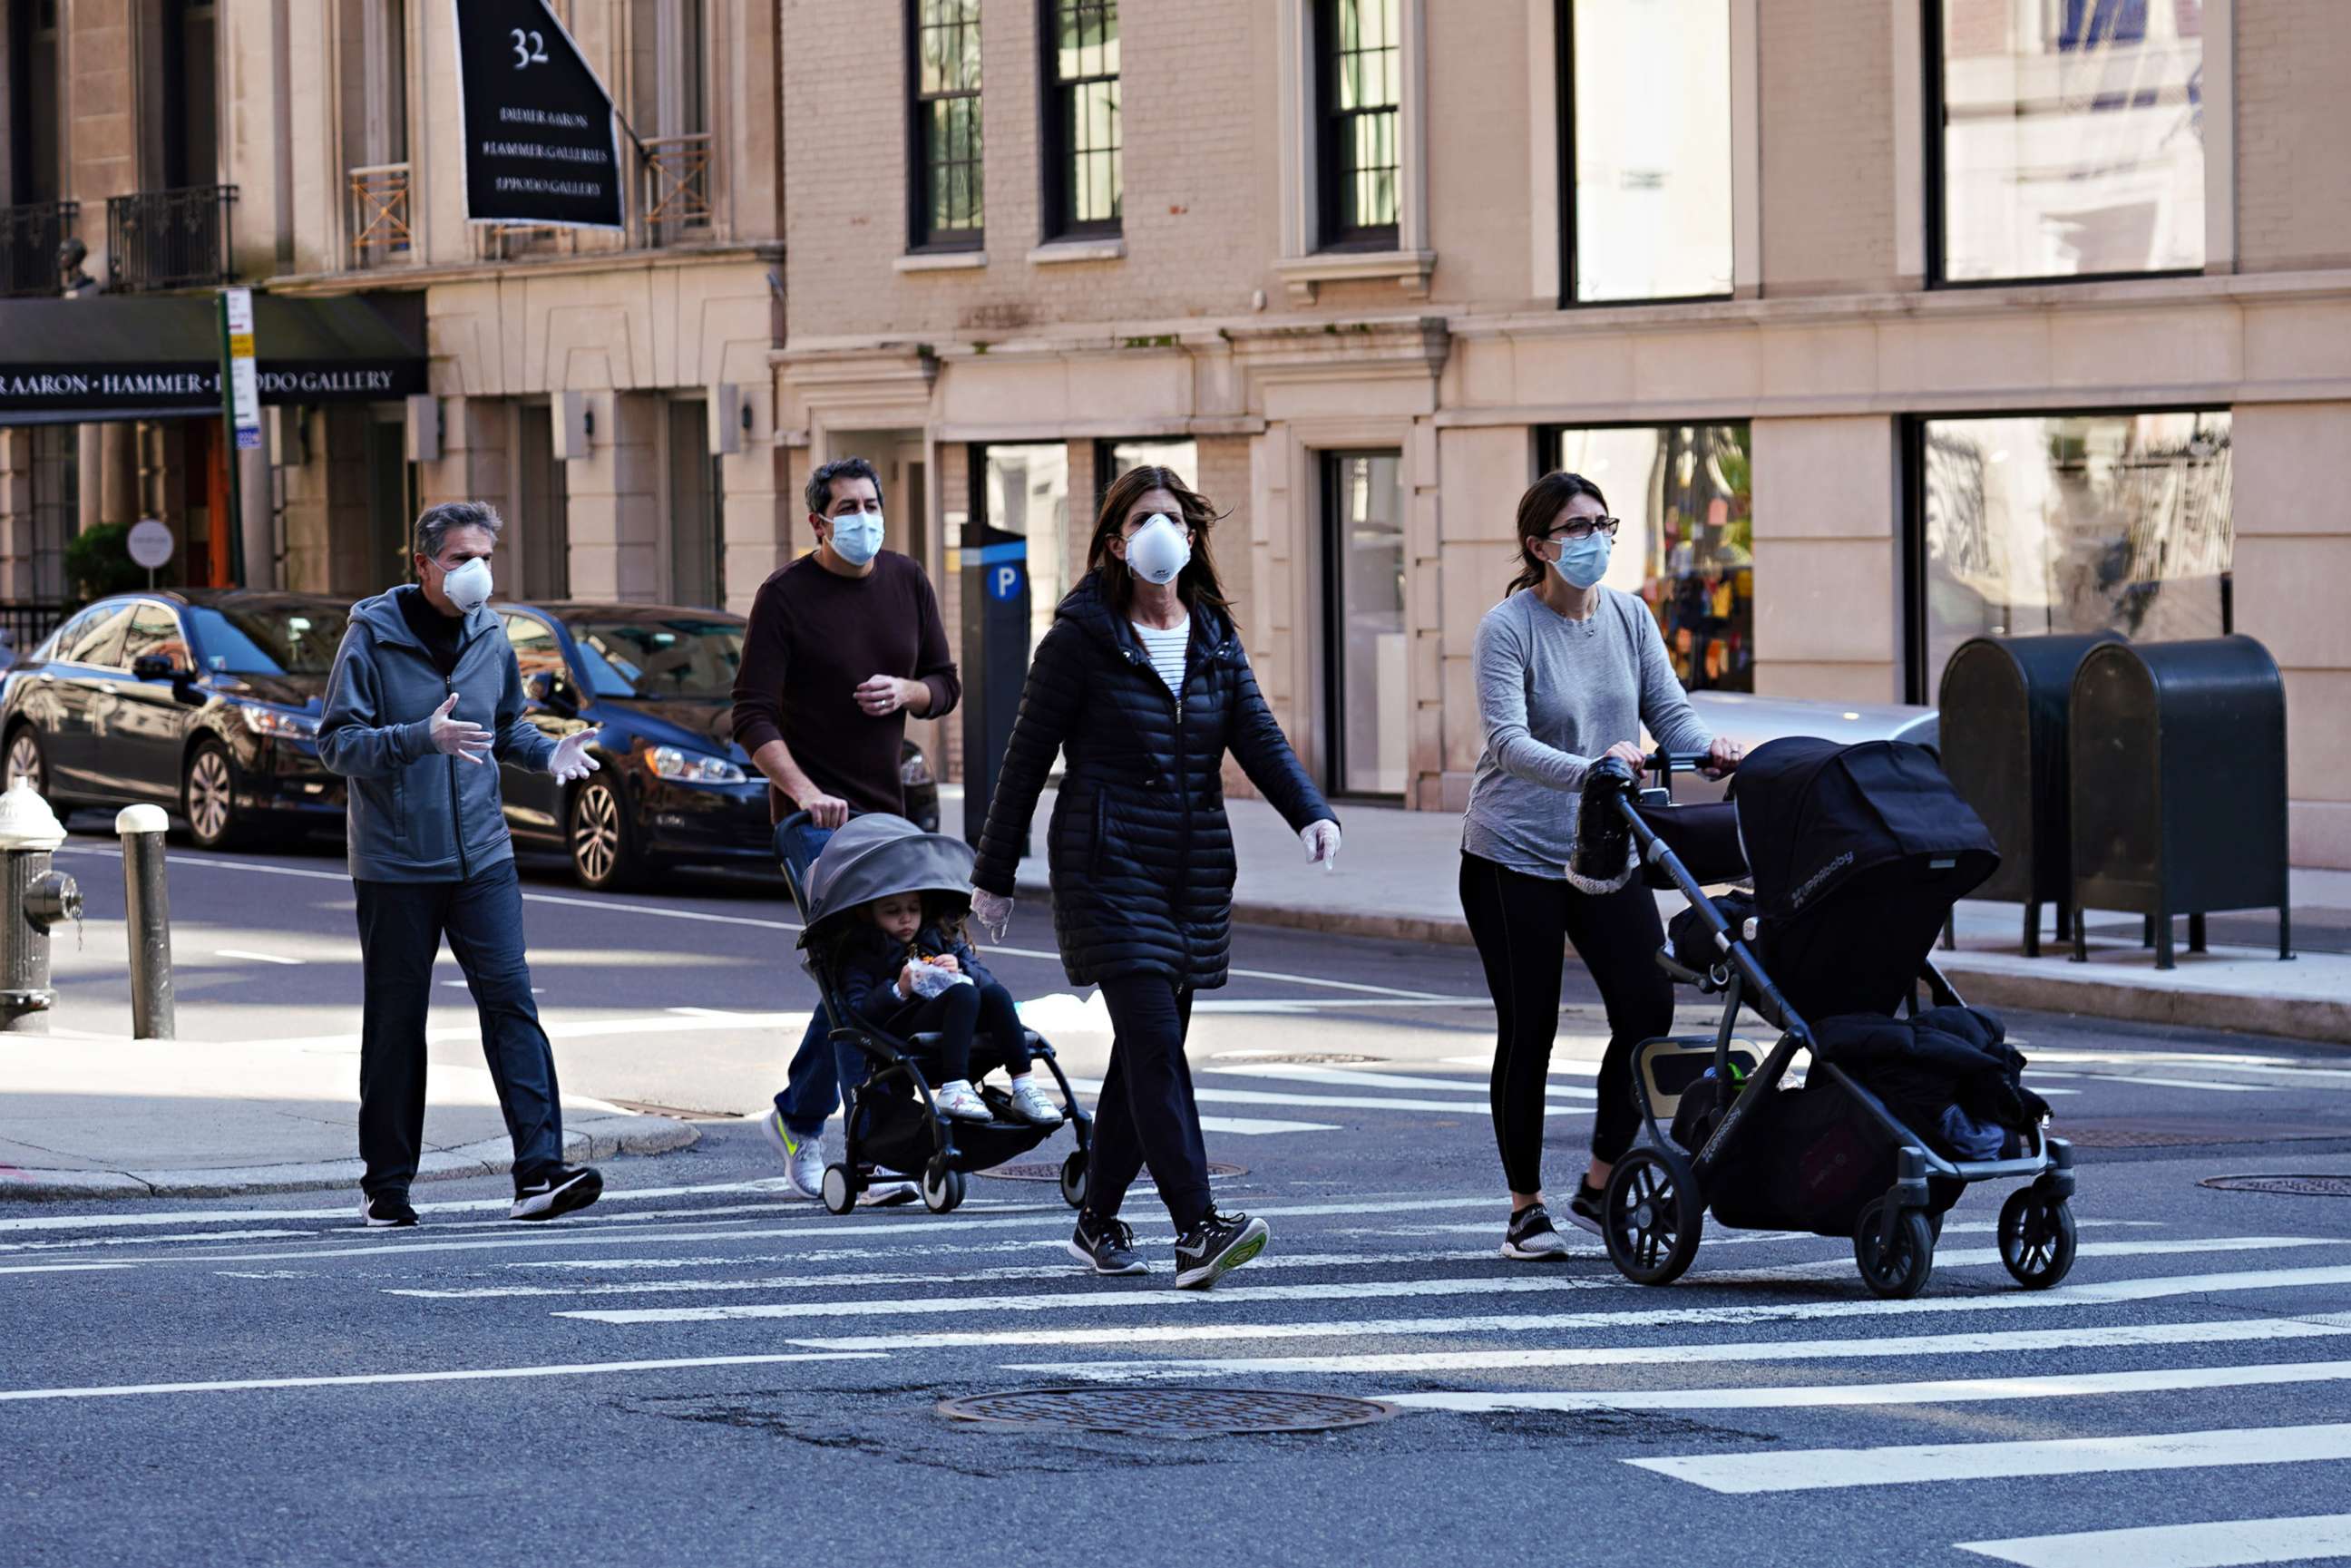 PHOTO: People are seen wearing protective masks and gloves during the coronavirus pandemic on April 12, 2020, in New York.